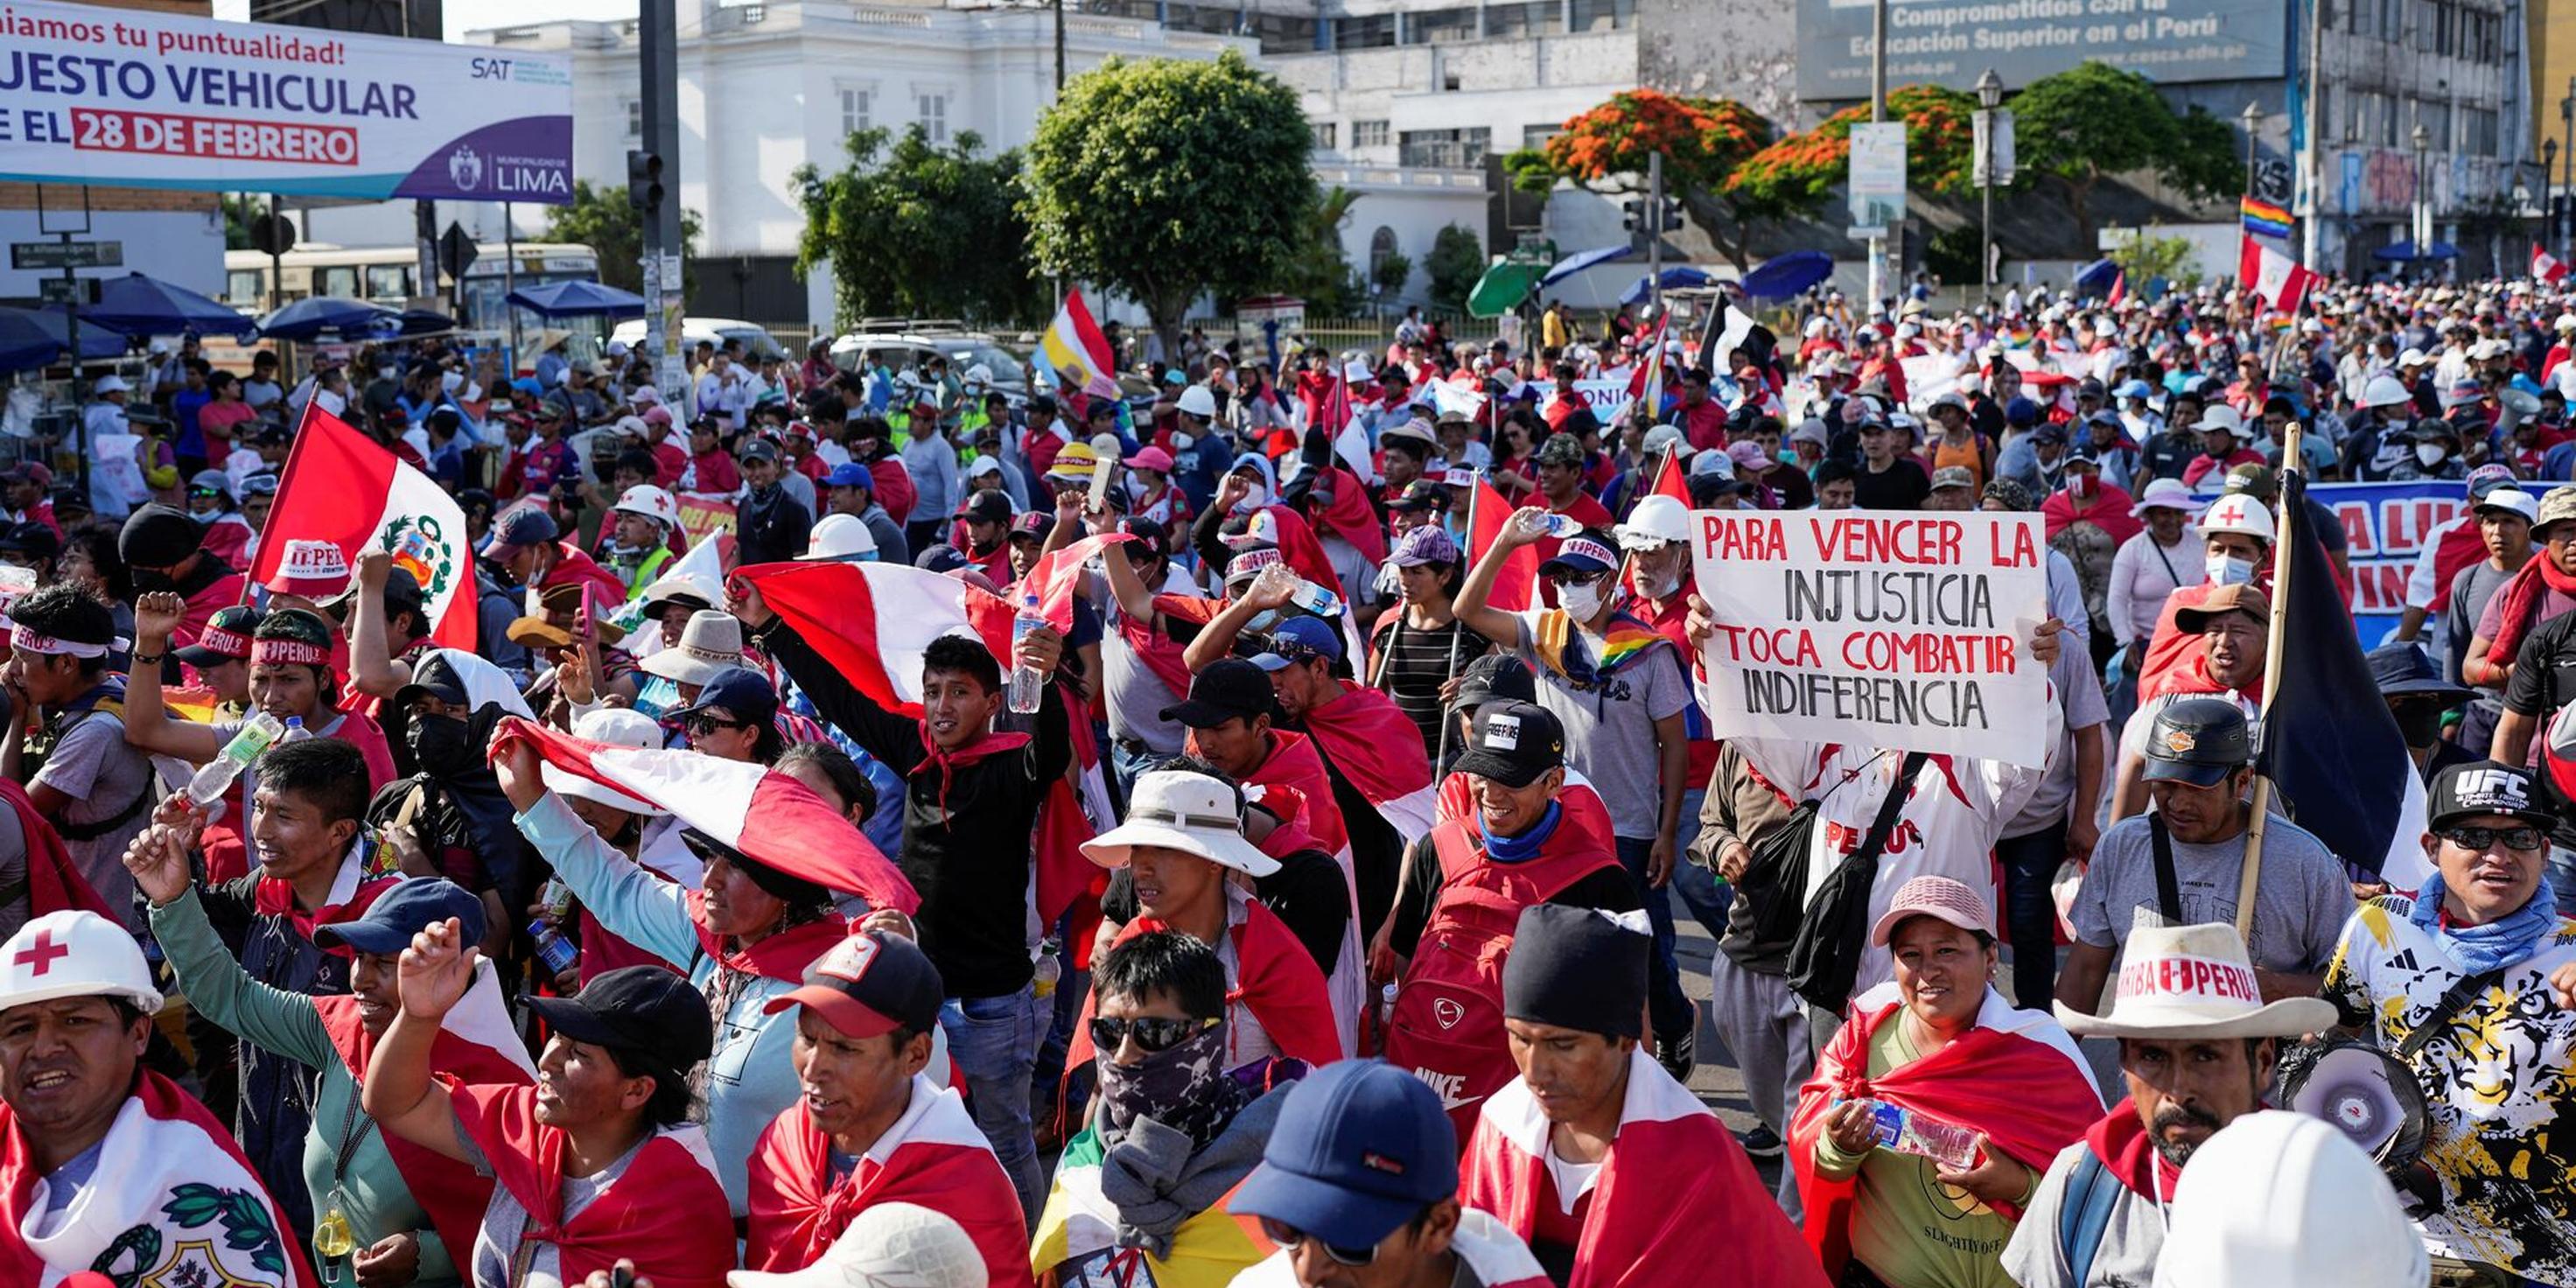 What Are the Roots of Peru’s Political Instability?